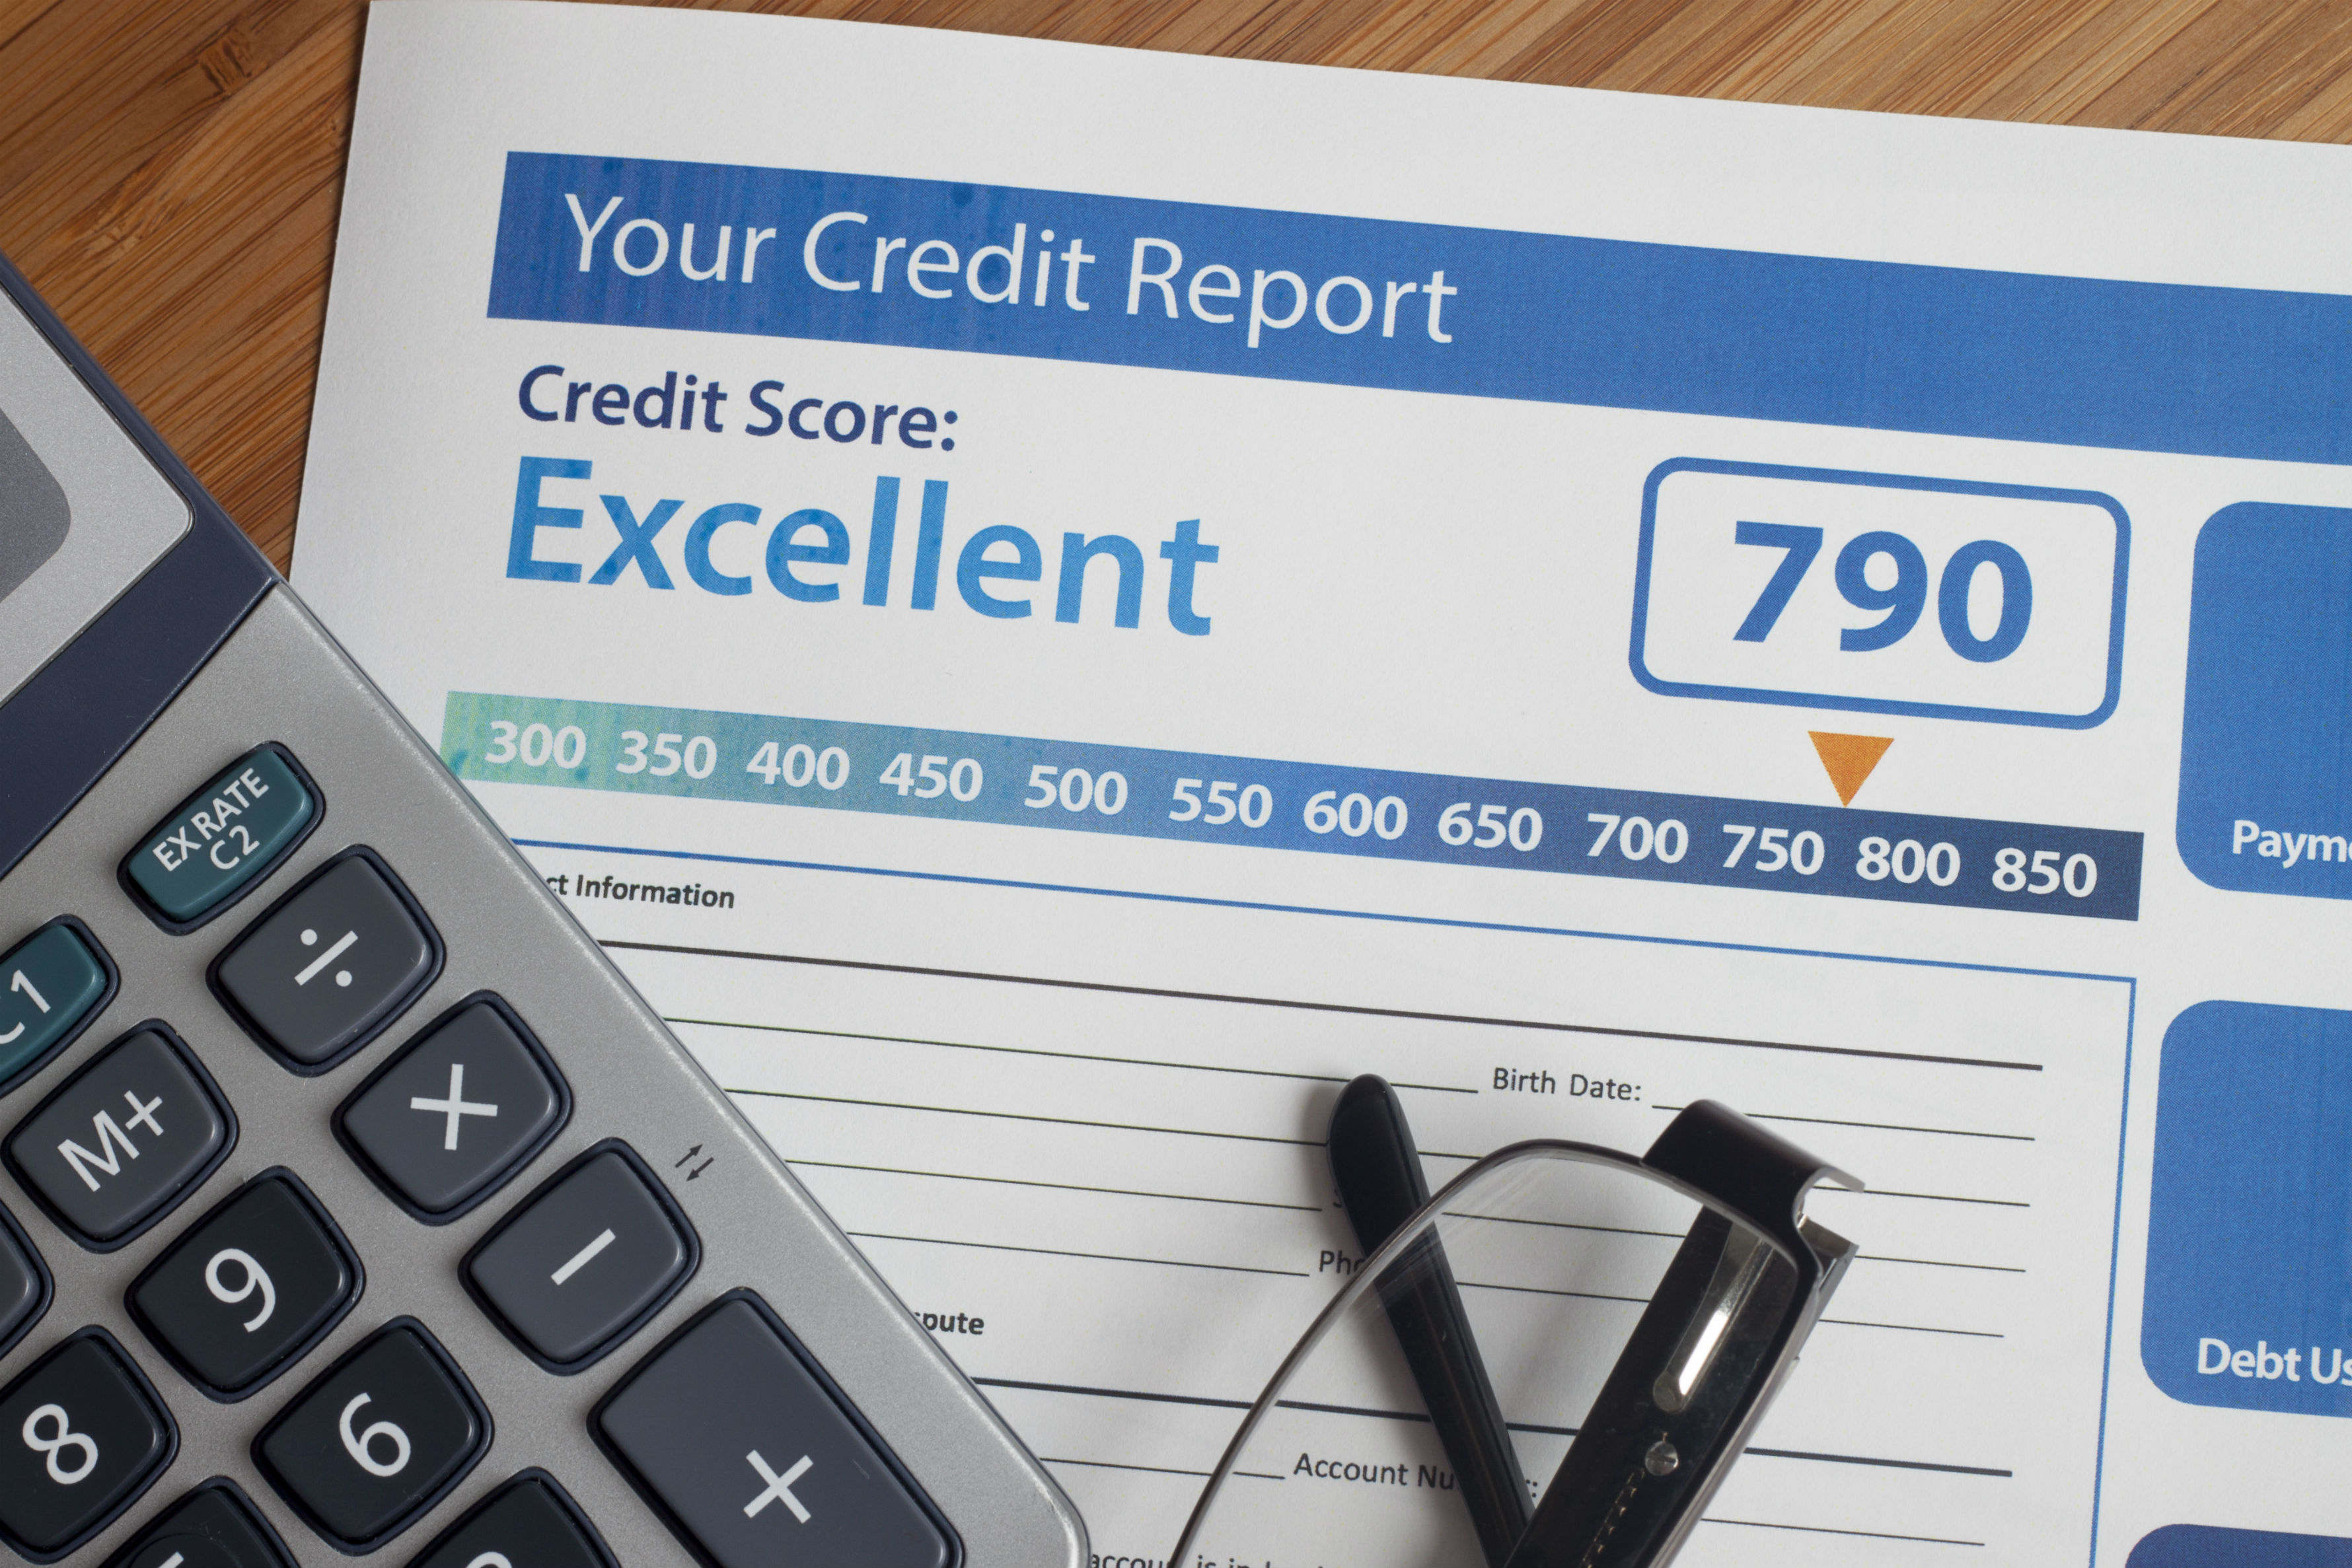 Calculating your credit score